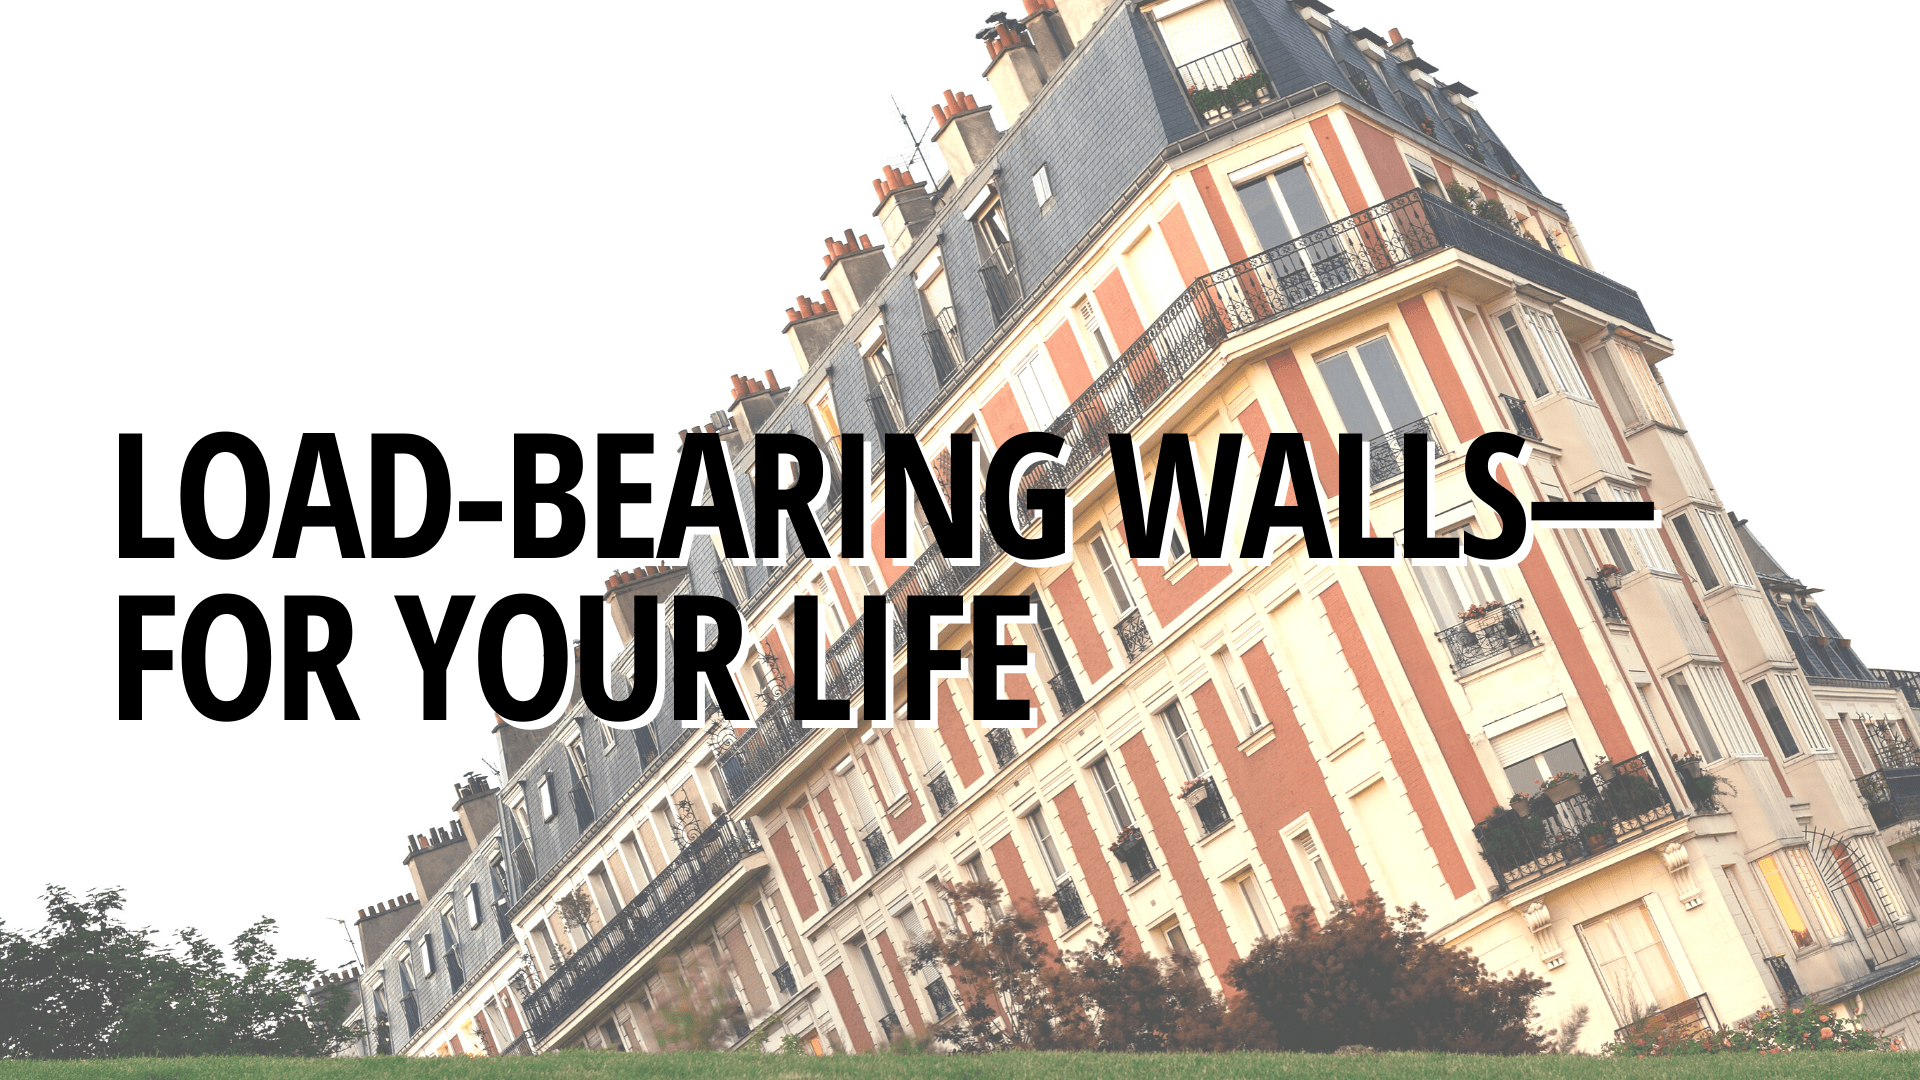 Load-bearing walls—for your life